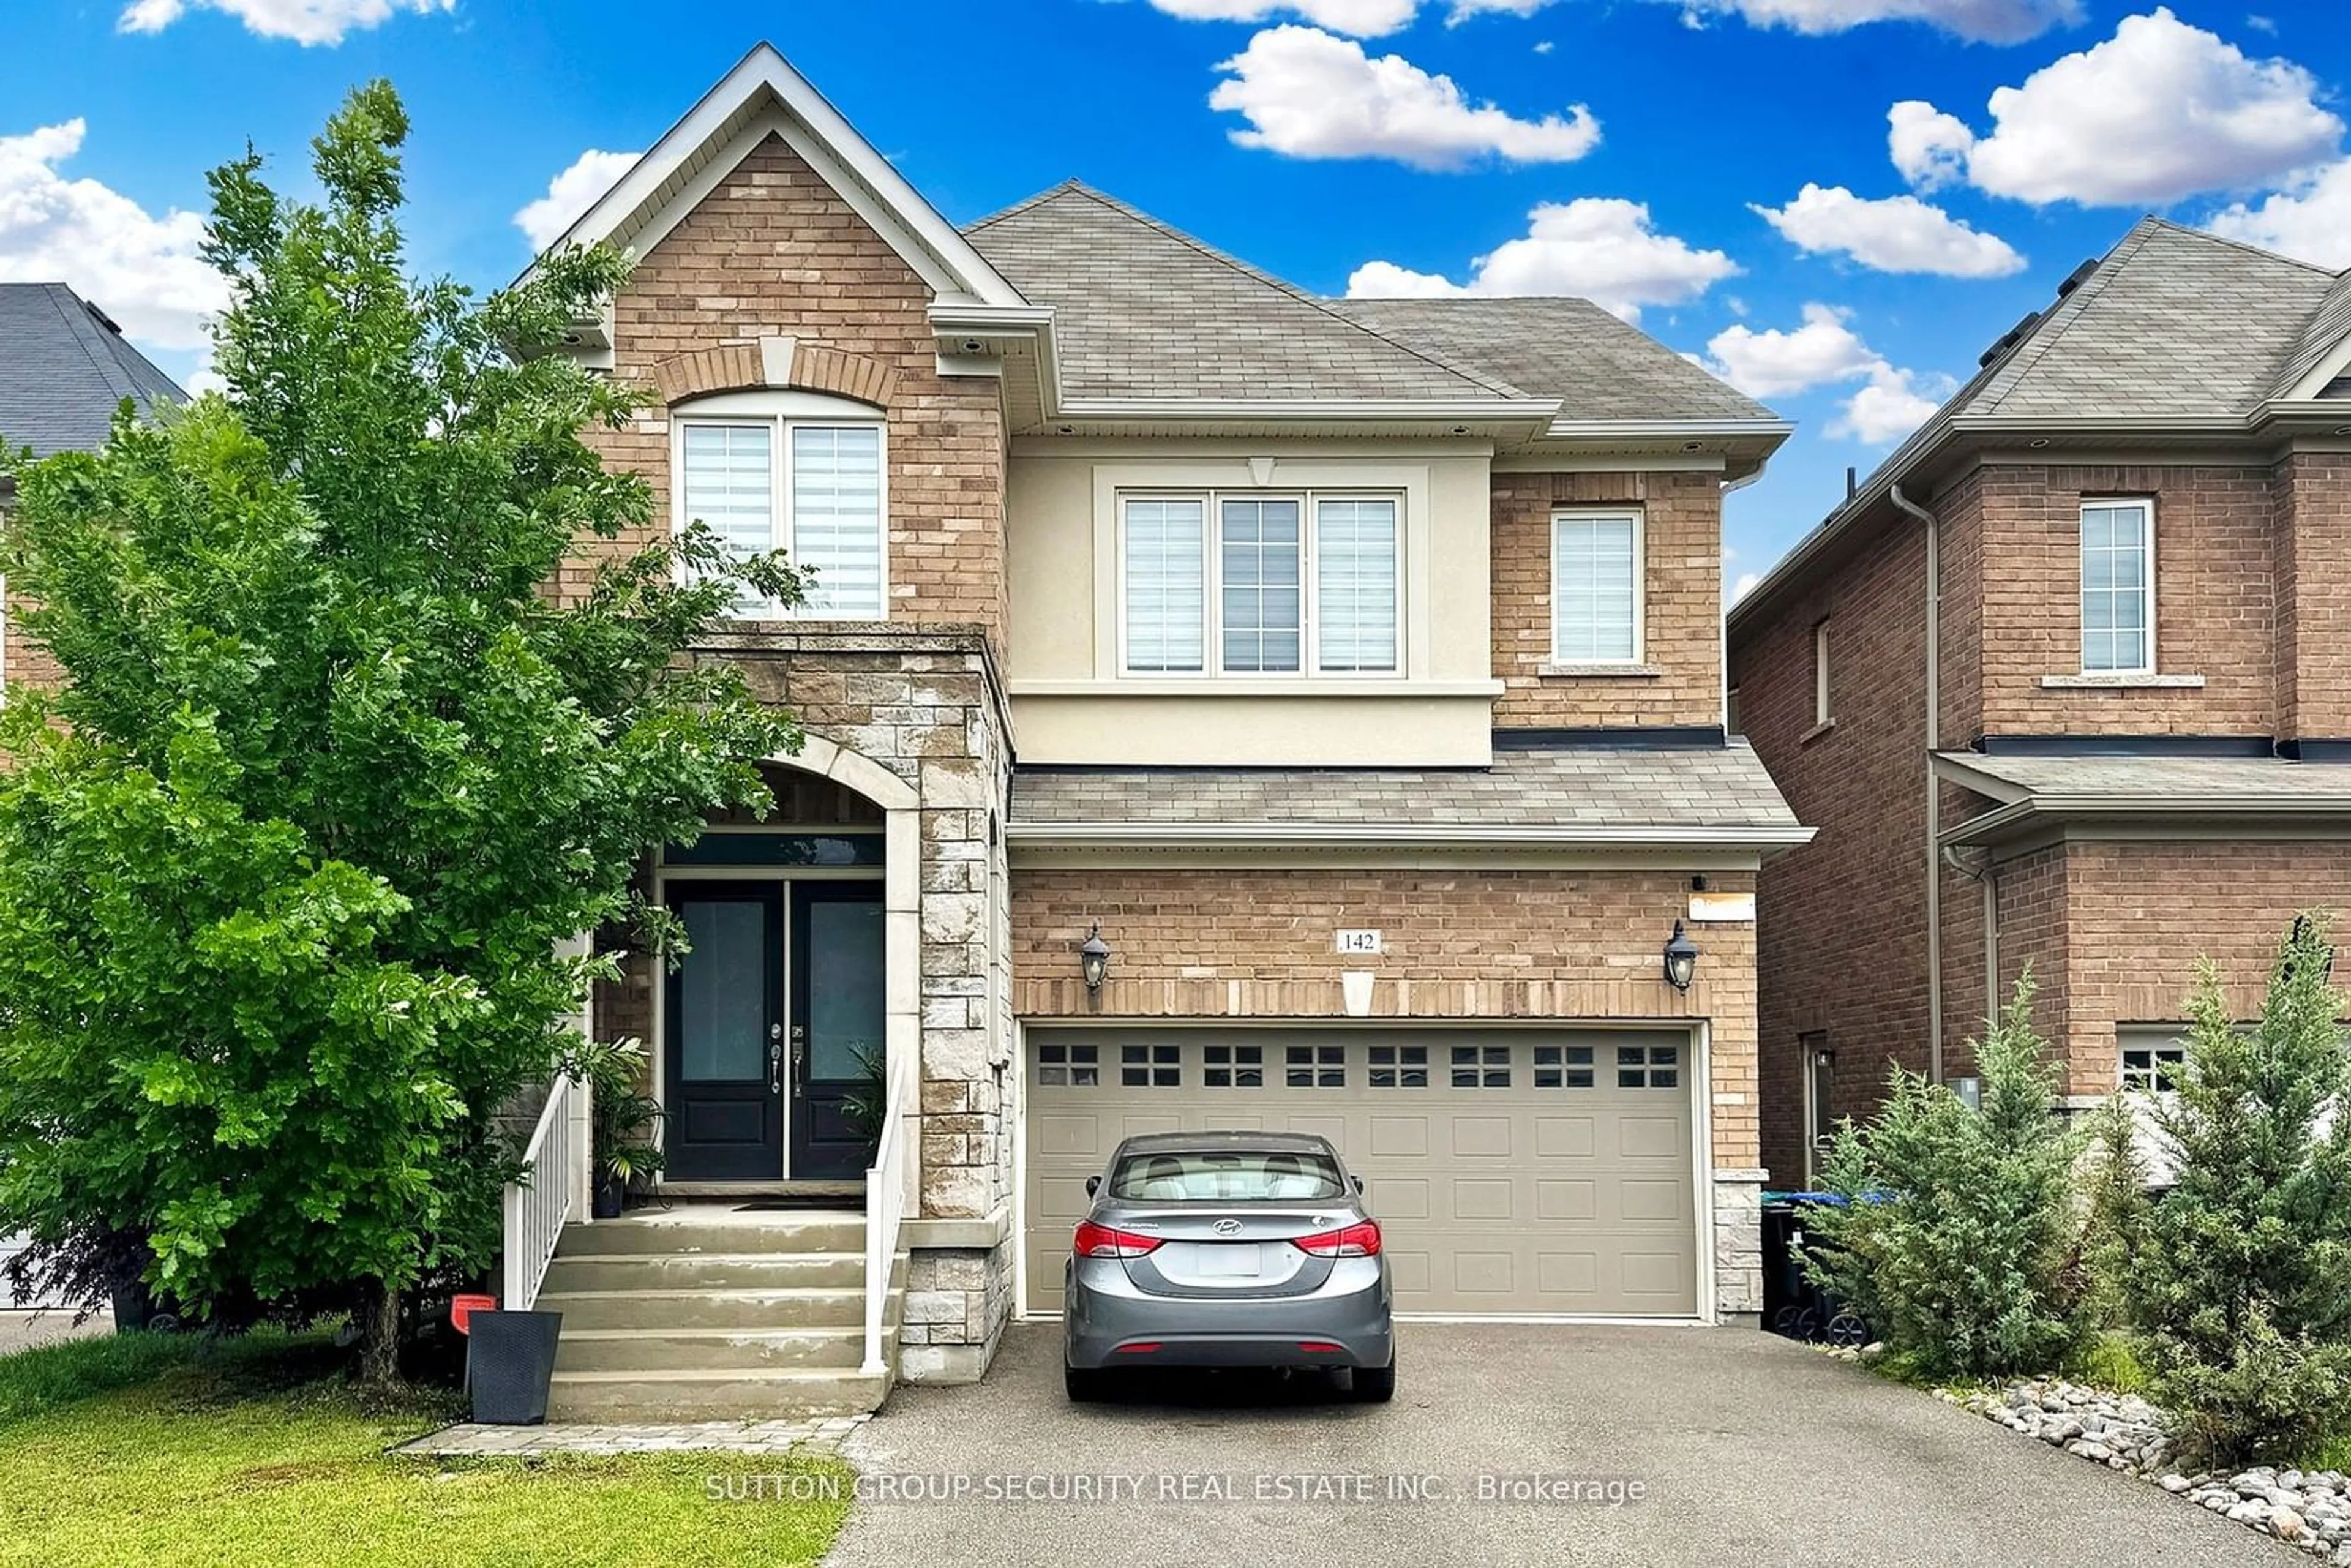 Home with brick exterior material for 142 McCann Cres, Bradford West Gwillimbury Ontario L3Z 2A5